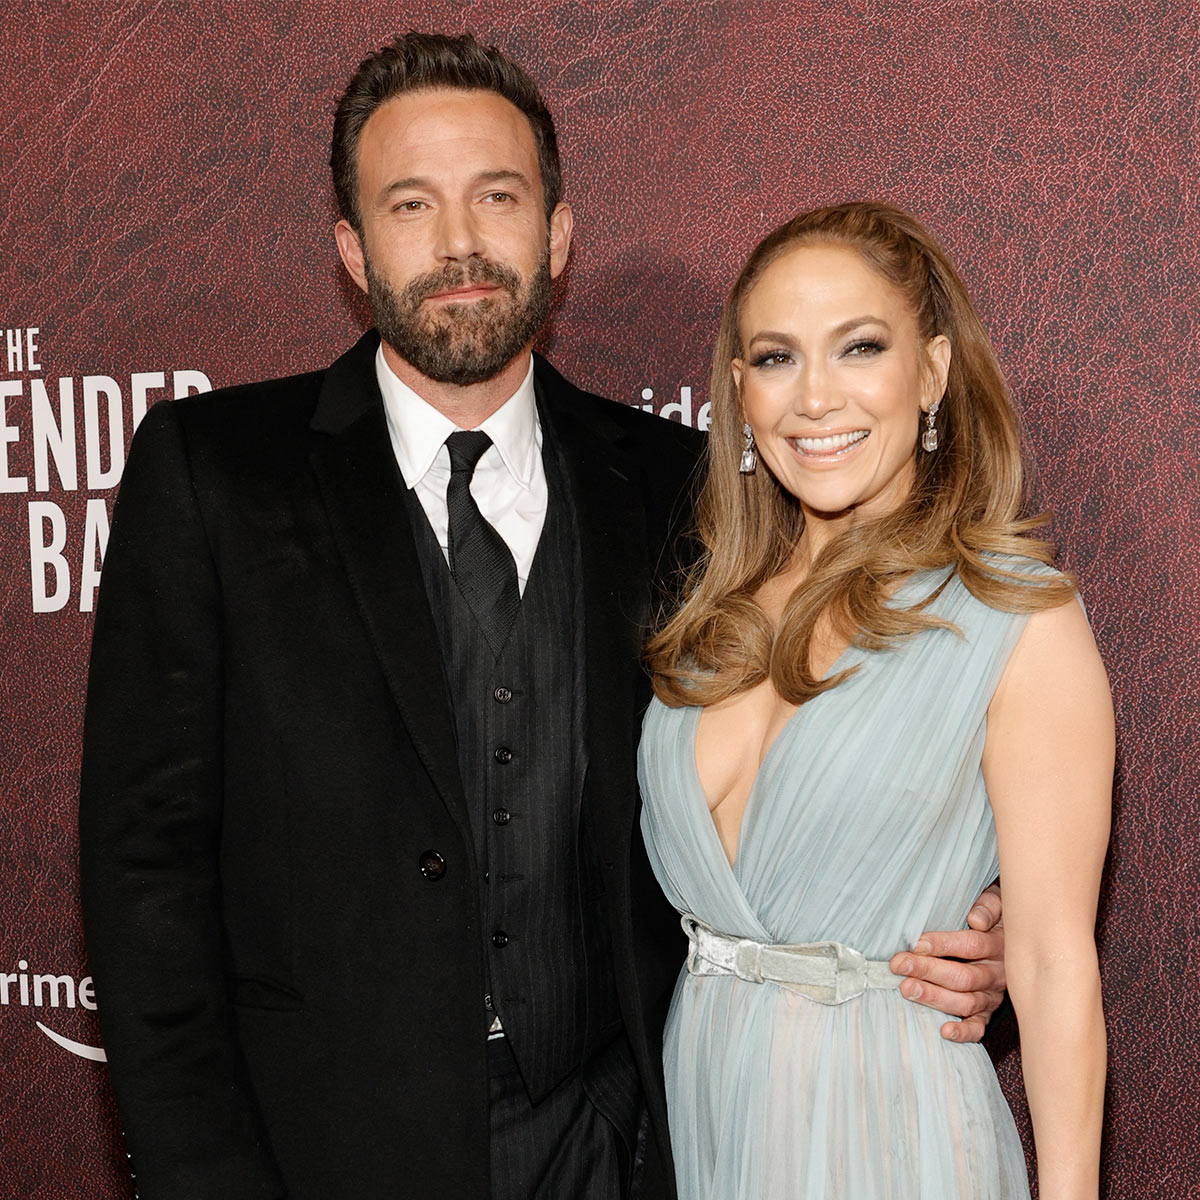 Watch Ben Affleck and Wife Jennifer Lopez Star in Hilarious Dunkin’ Donuts Super Bowl Ad – E! Online